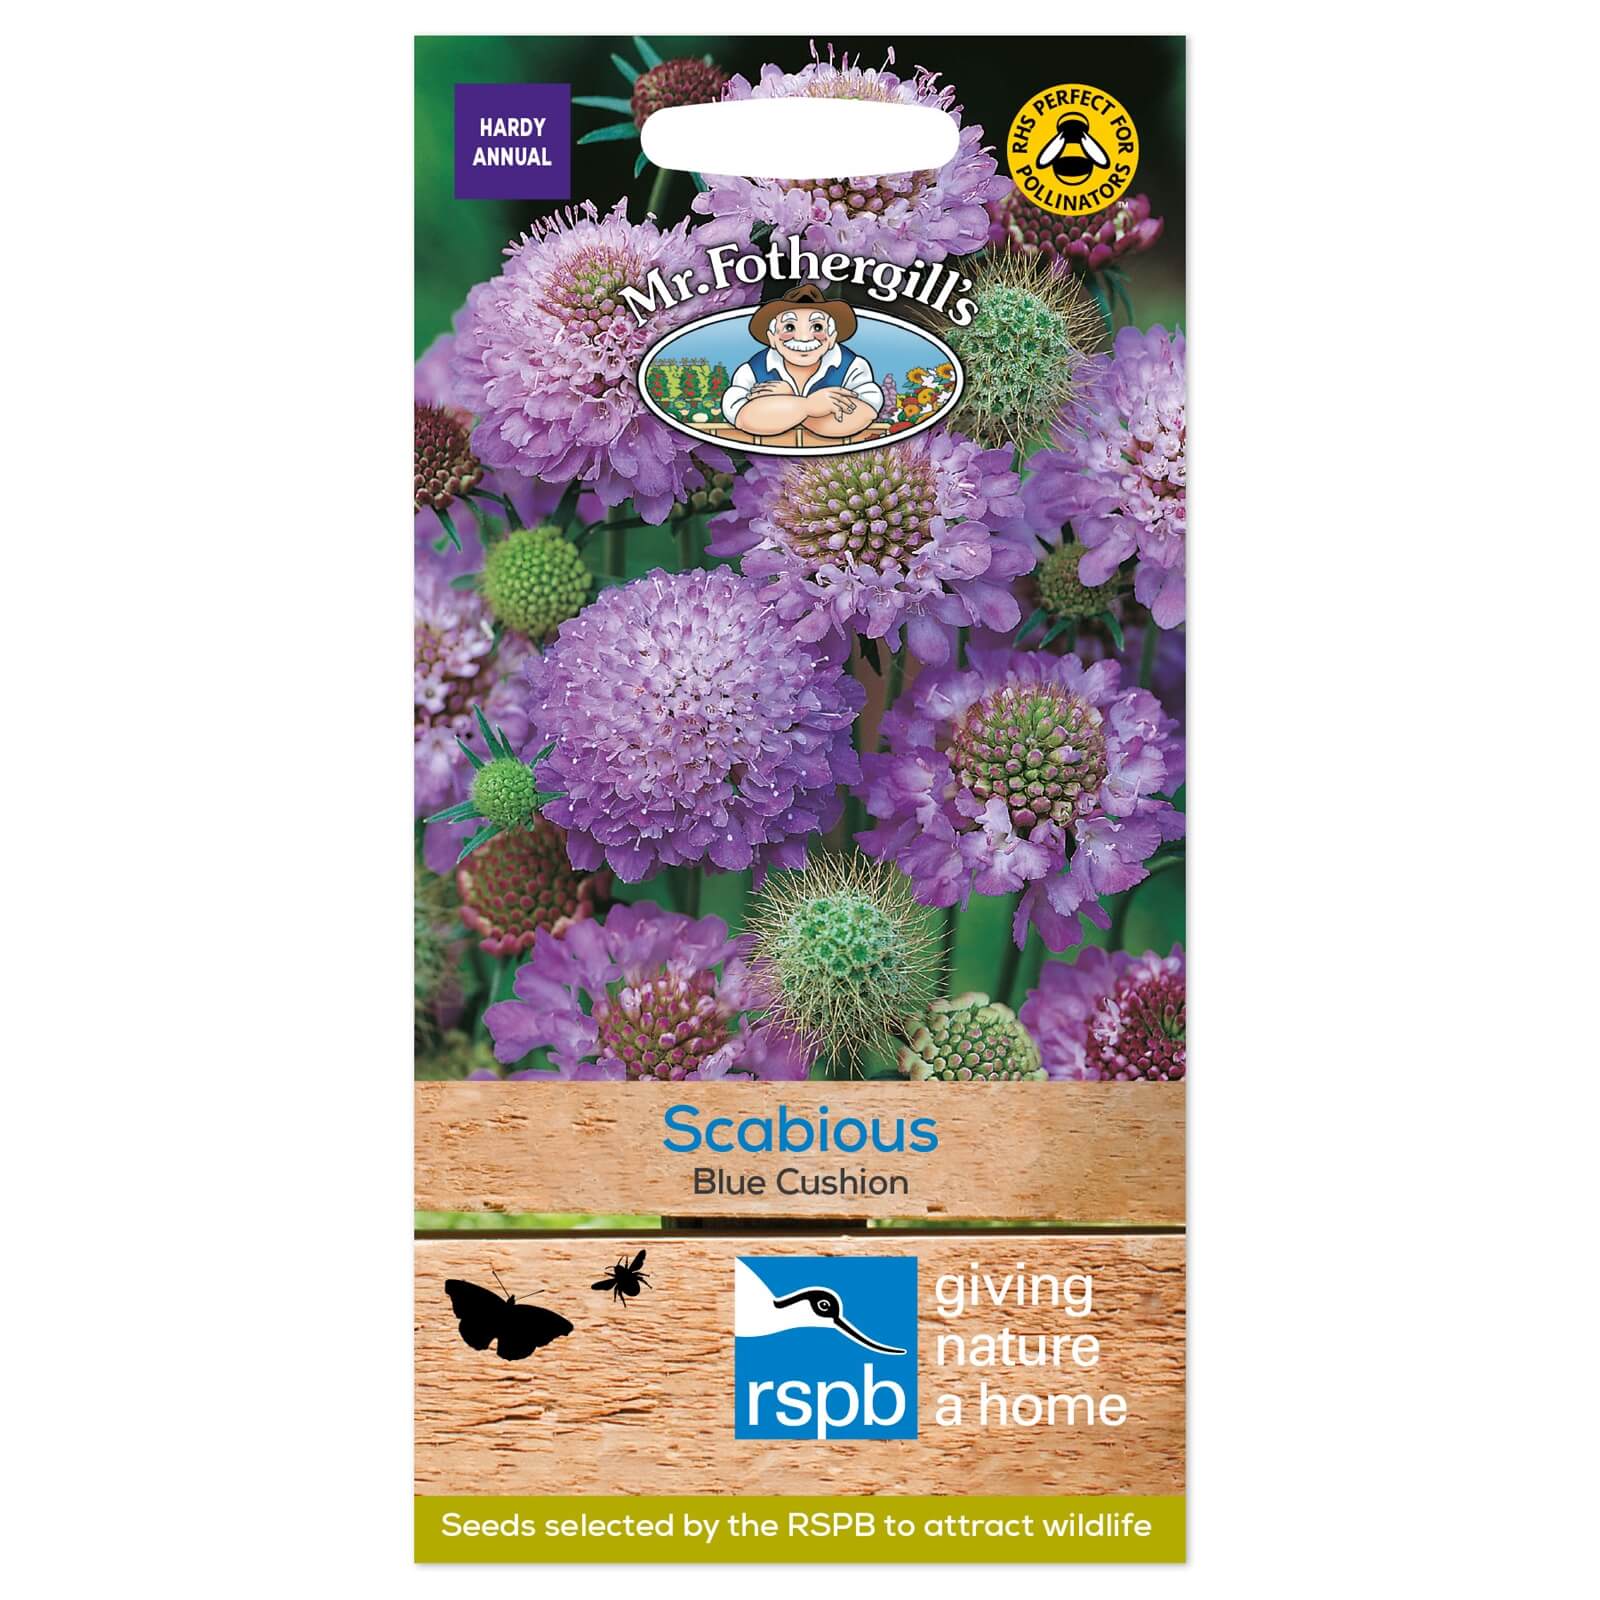 Mr. Fothergill's Scabious Blue Cushion Seeds